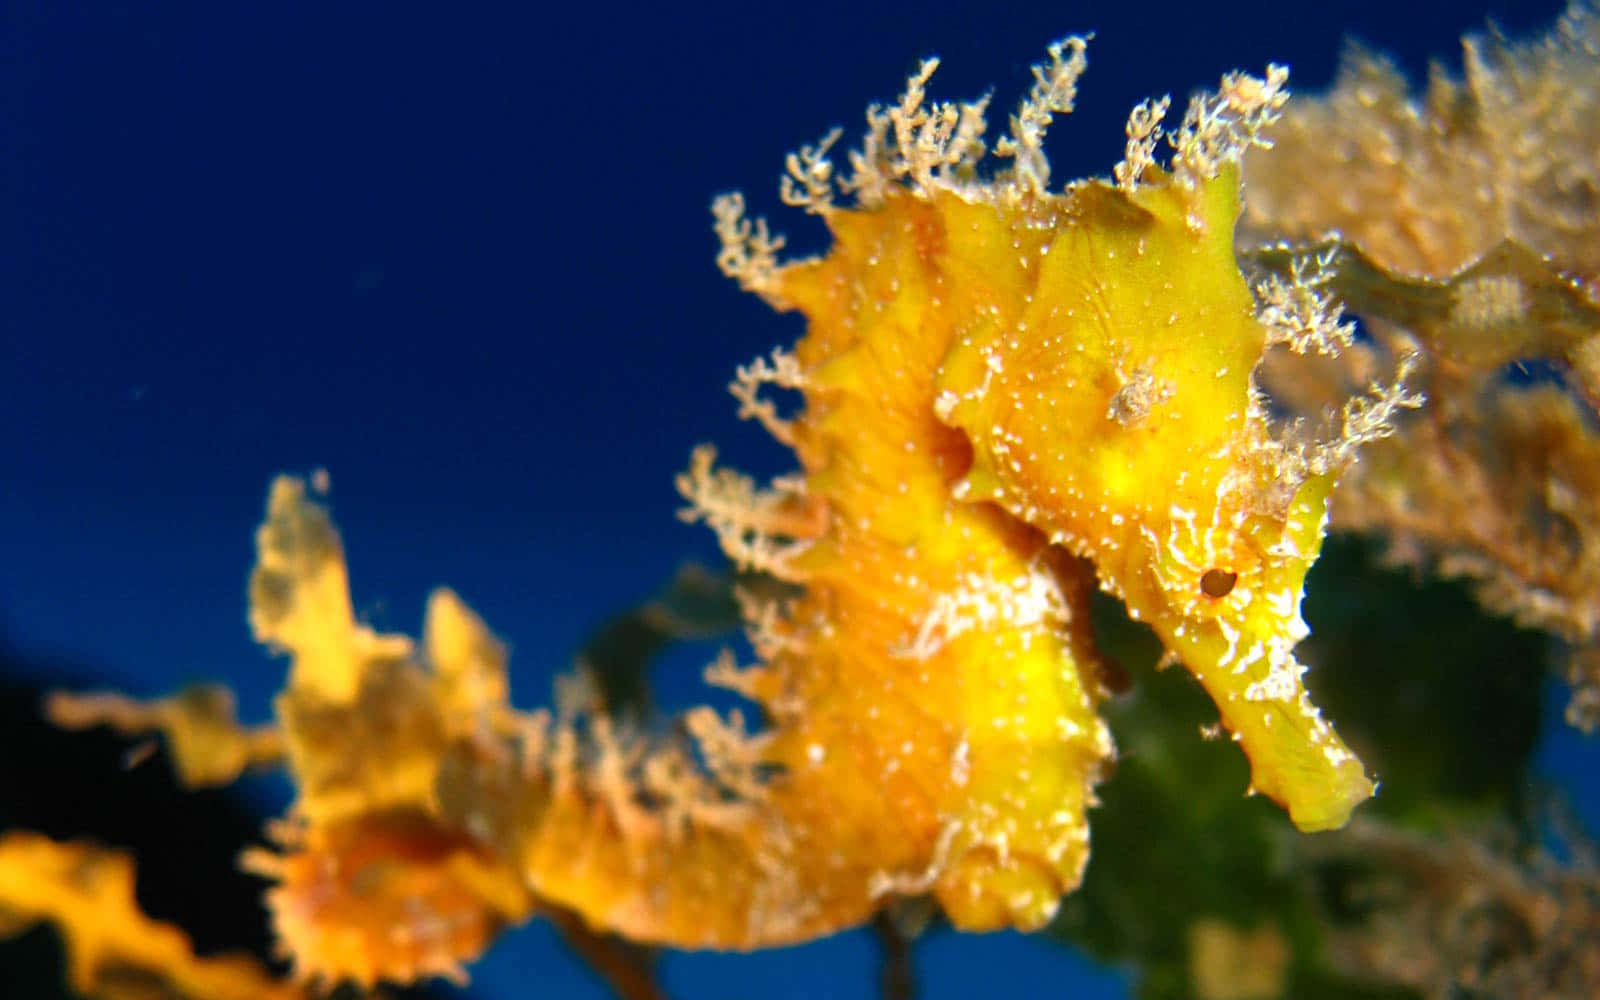 A close-up of a graceful seahorse swimming in a coral reef.